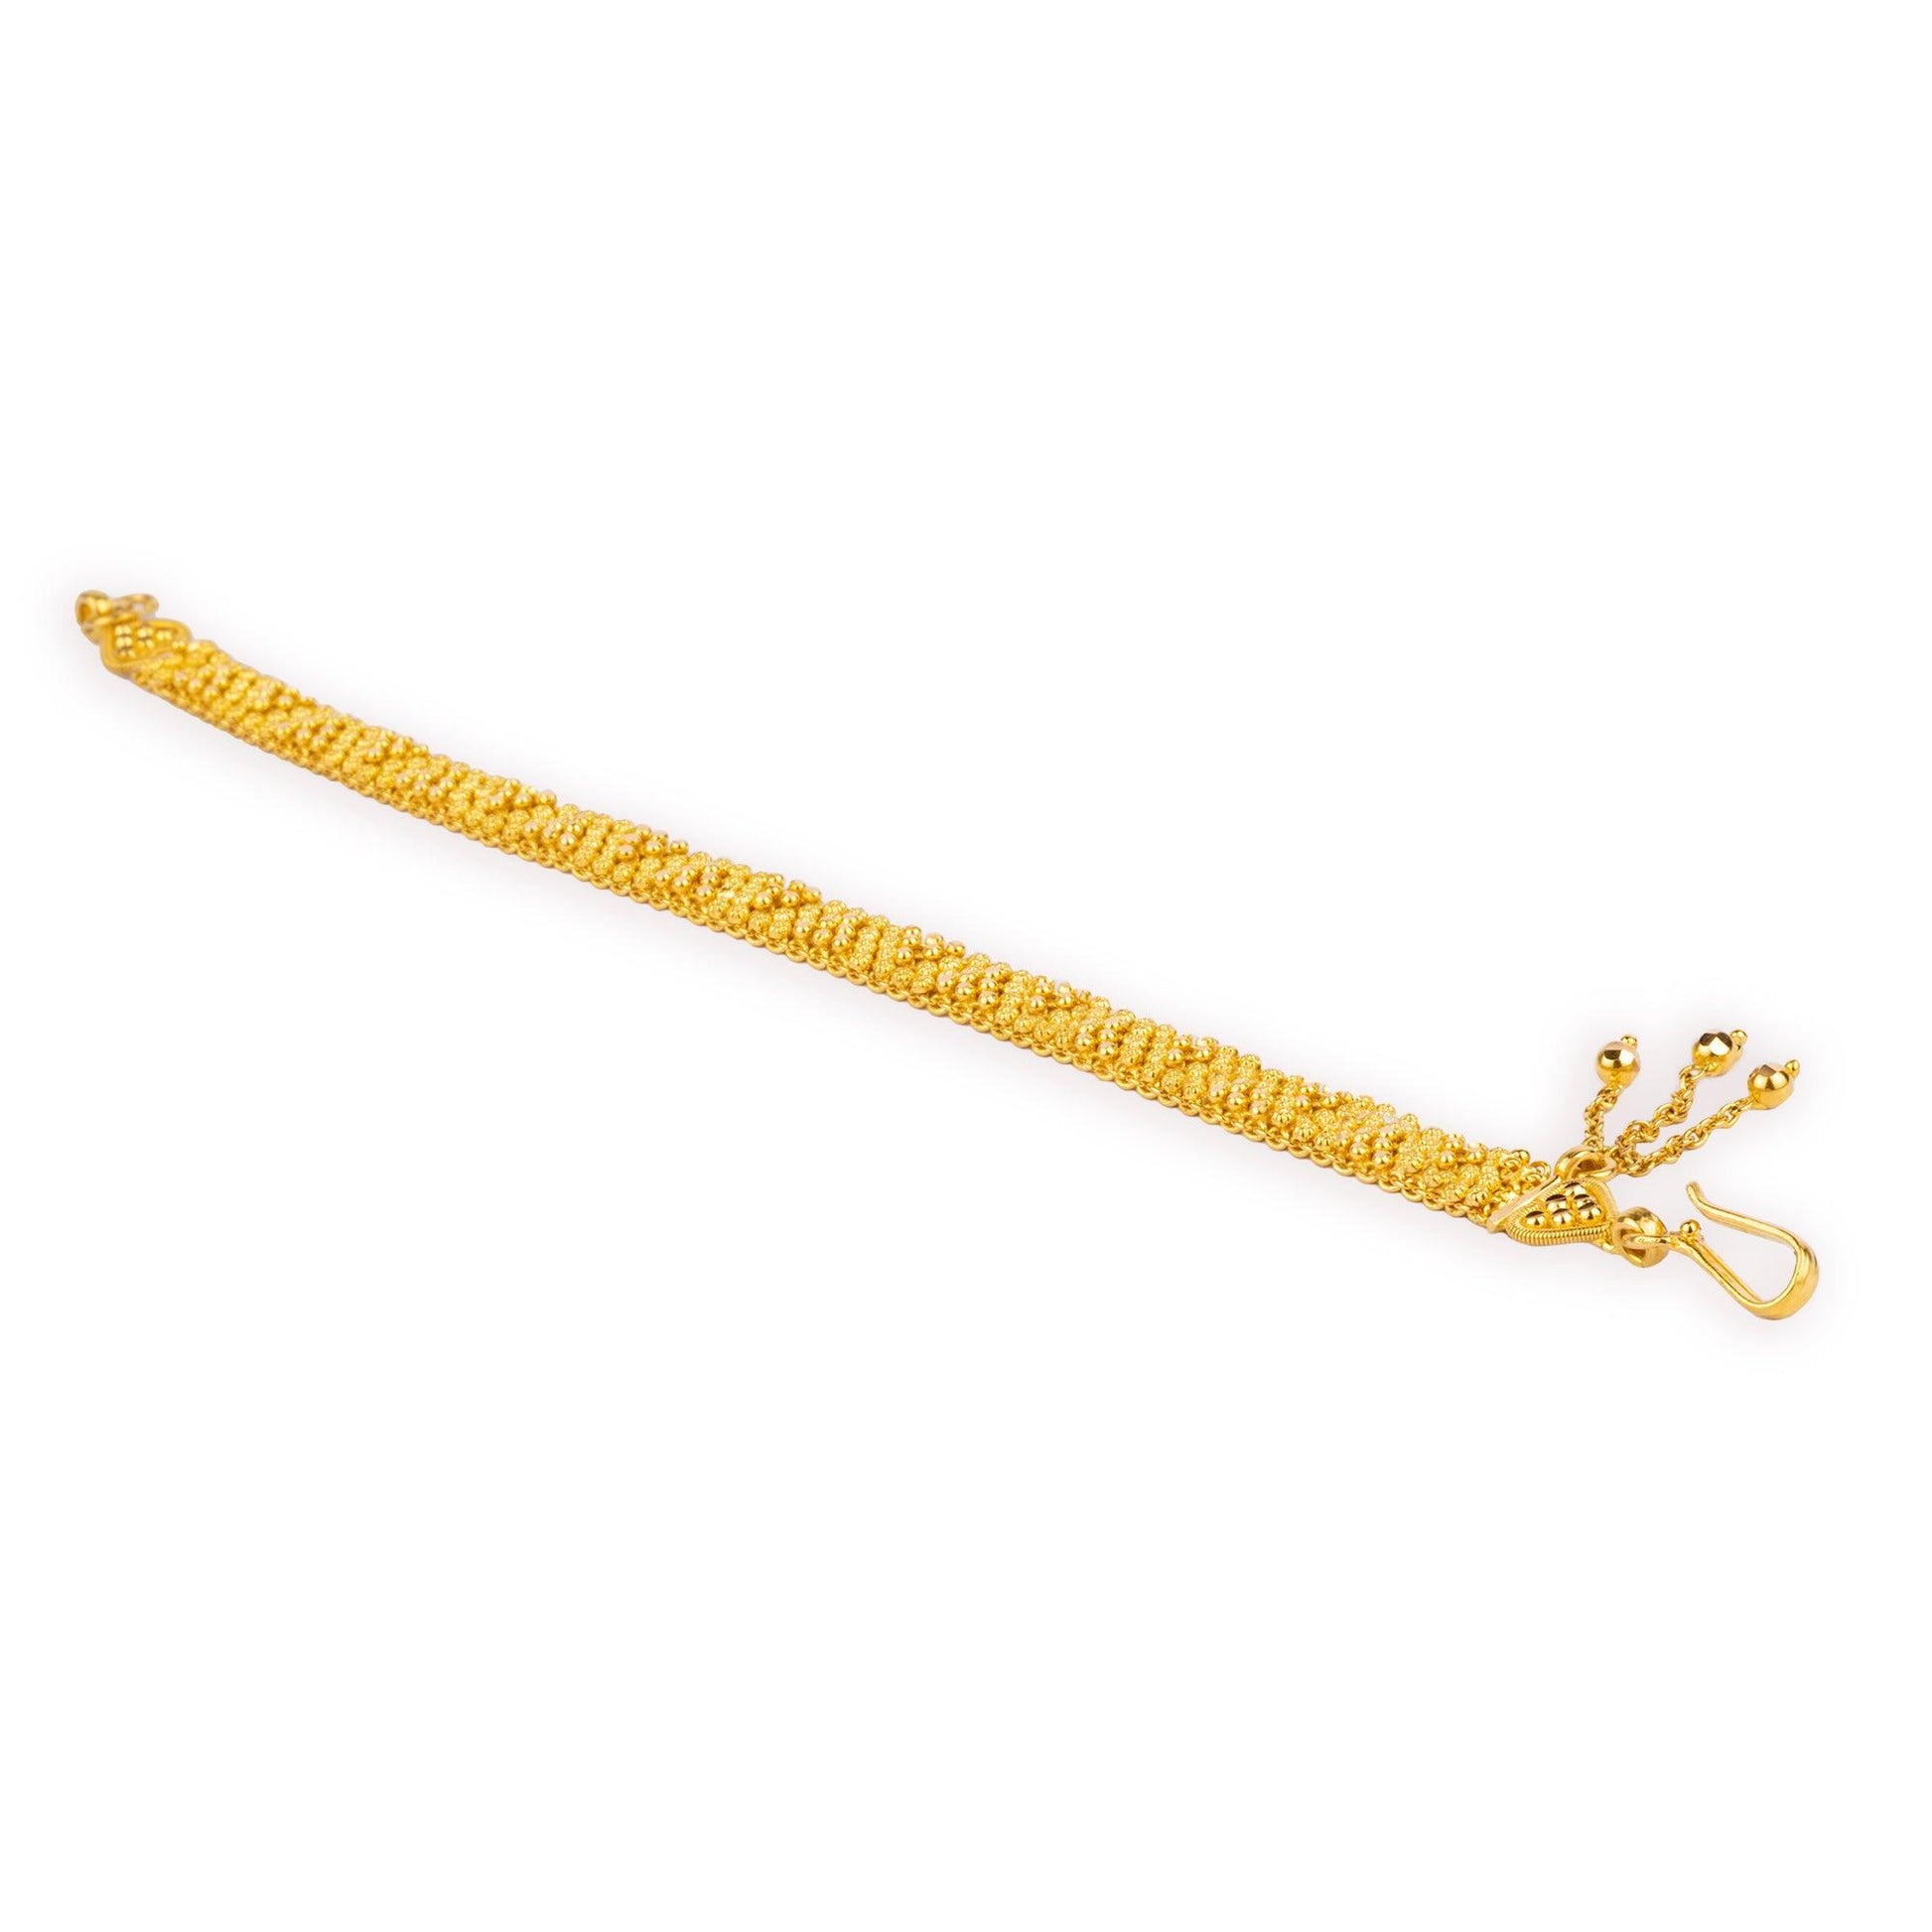 22ct Gold Ladies Bracelet with Hook Clasp and Three Drops (15.4g) LBR-3975 - Minar Jewellers